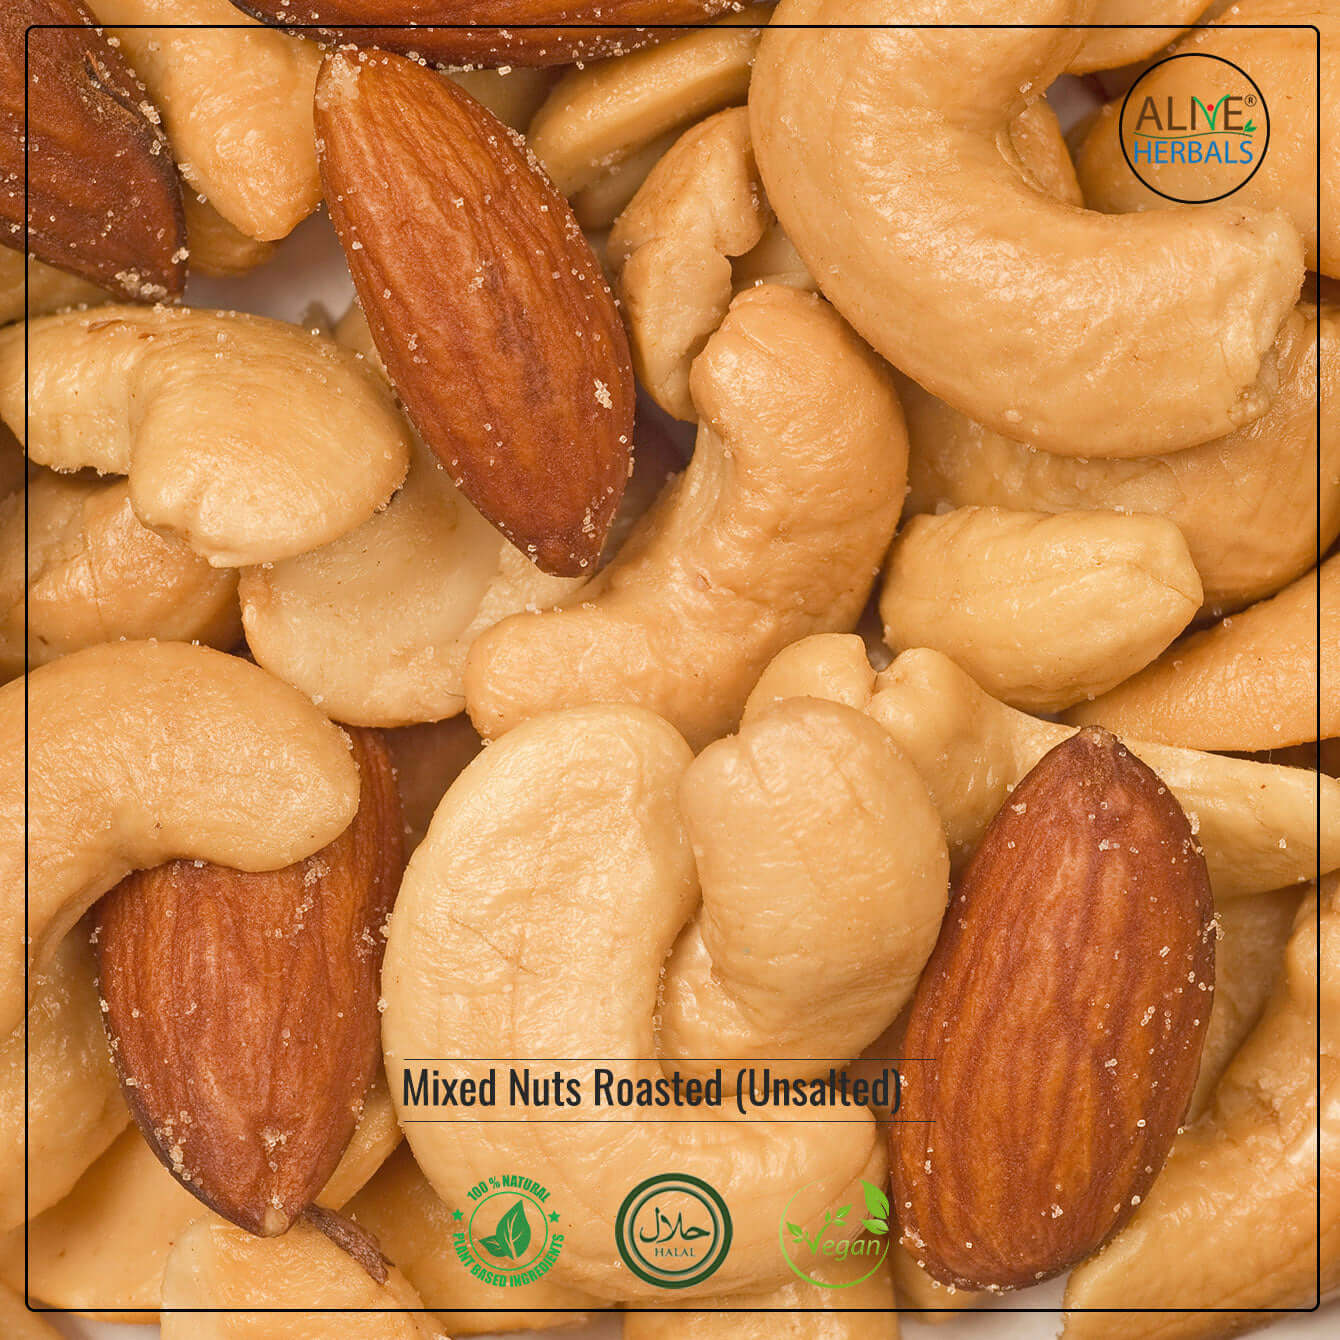 Roasted unsalted Mixed Nuts - Buy at Natural Food Store | Alive Herbals.